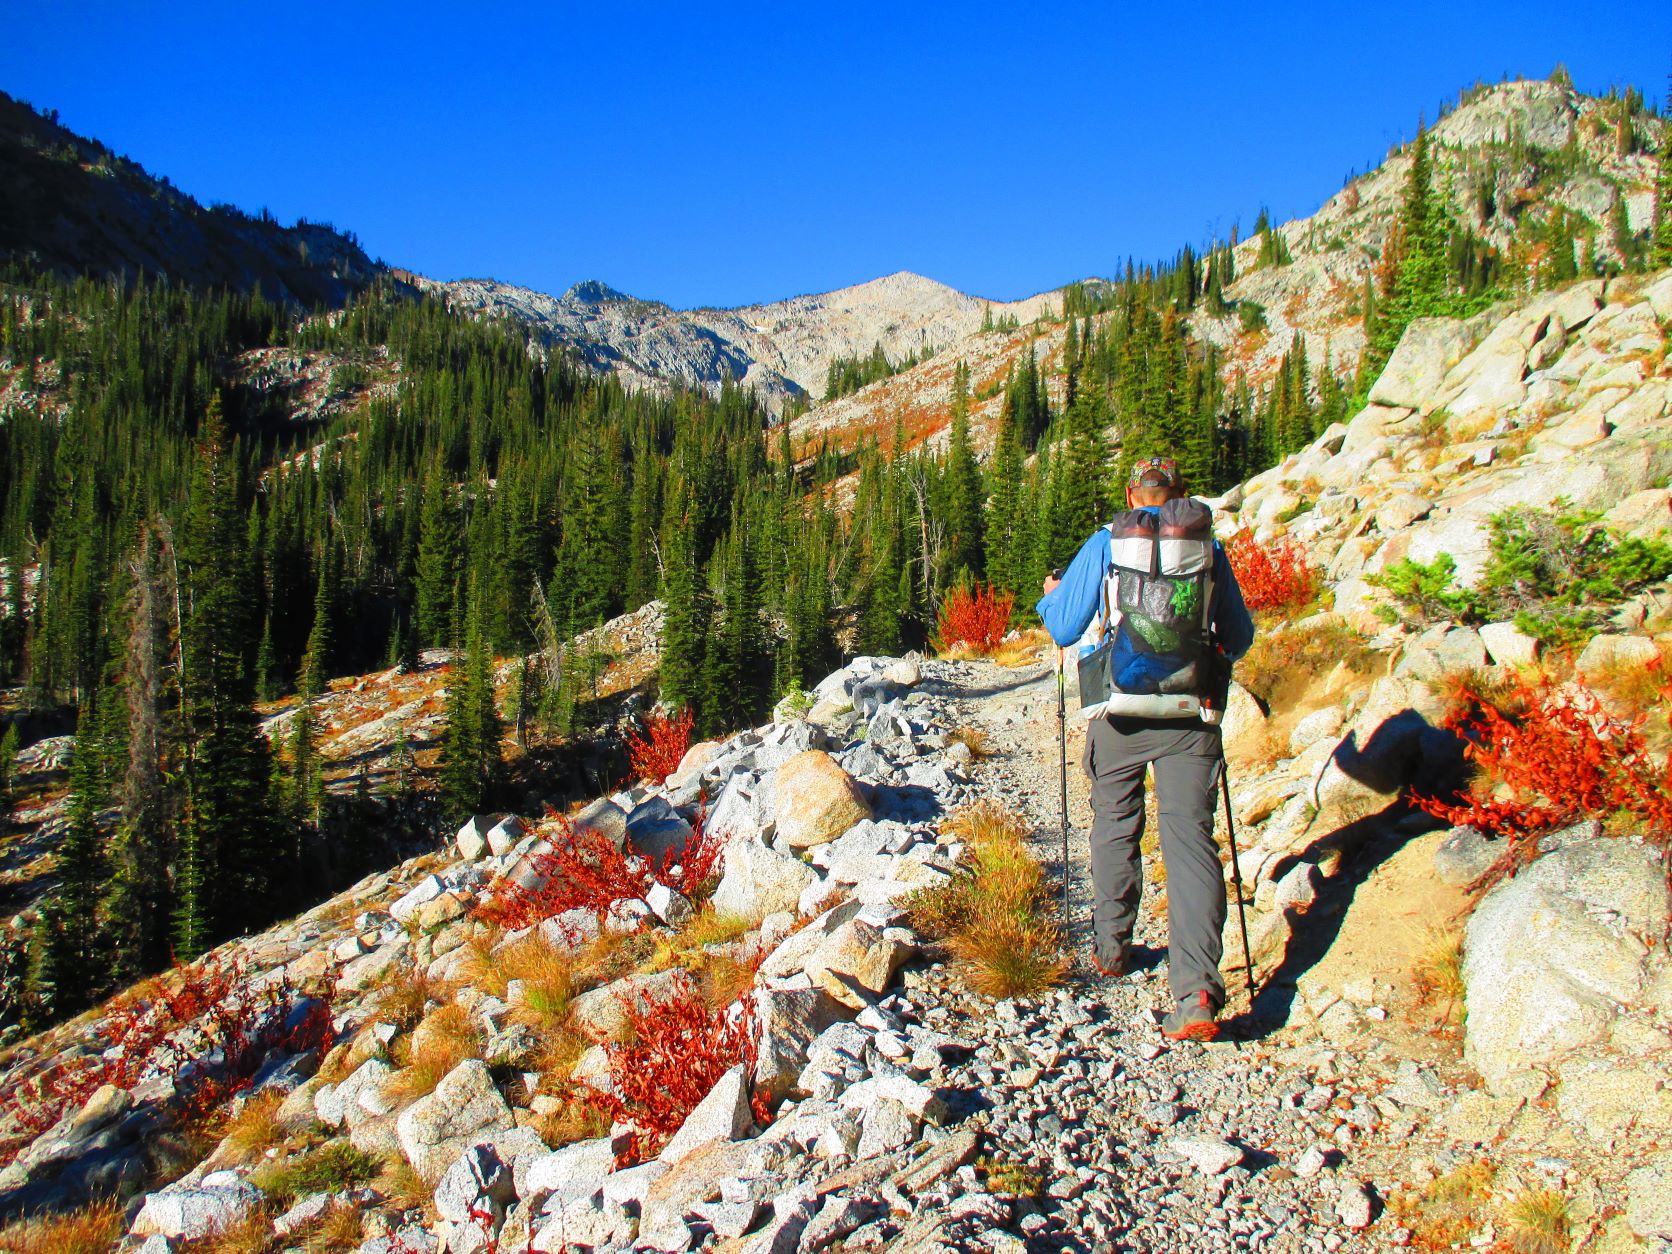 Man hiking with trekking poles, wearing a backpack, along a rocky dirt trail with small red-colored bushes along the sides and mountain ridge in the distance.